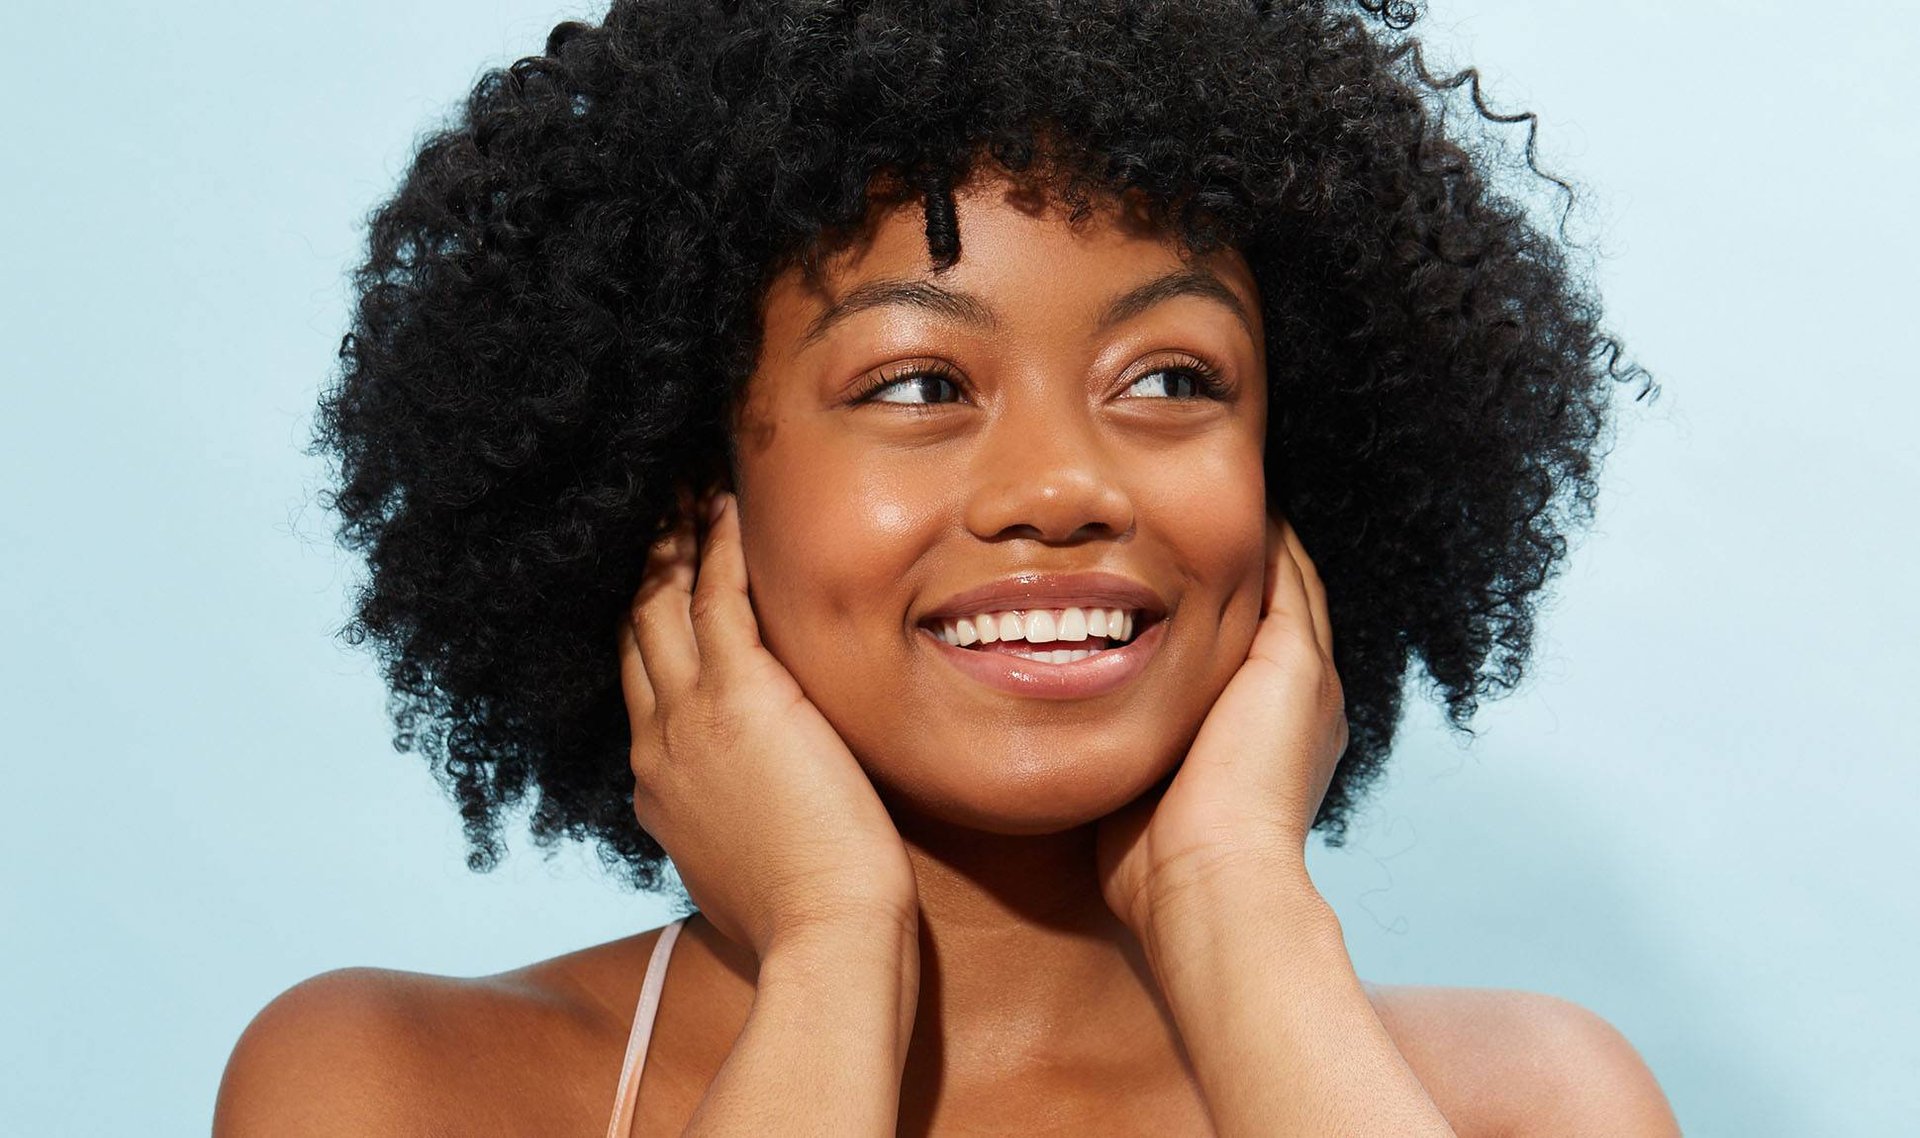 6 Skincare Tips to Get Glowing Skin for Spring